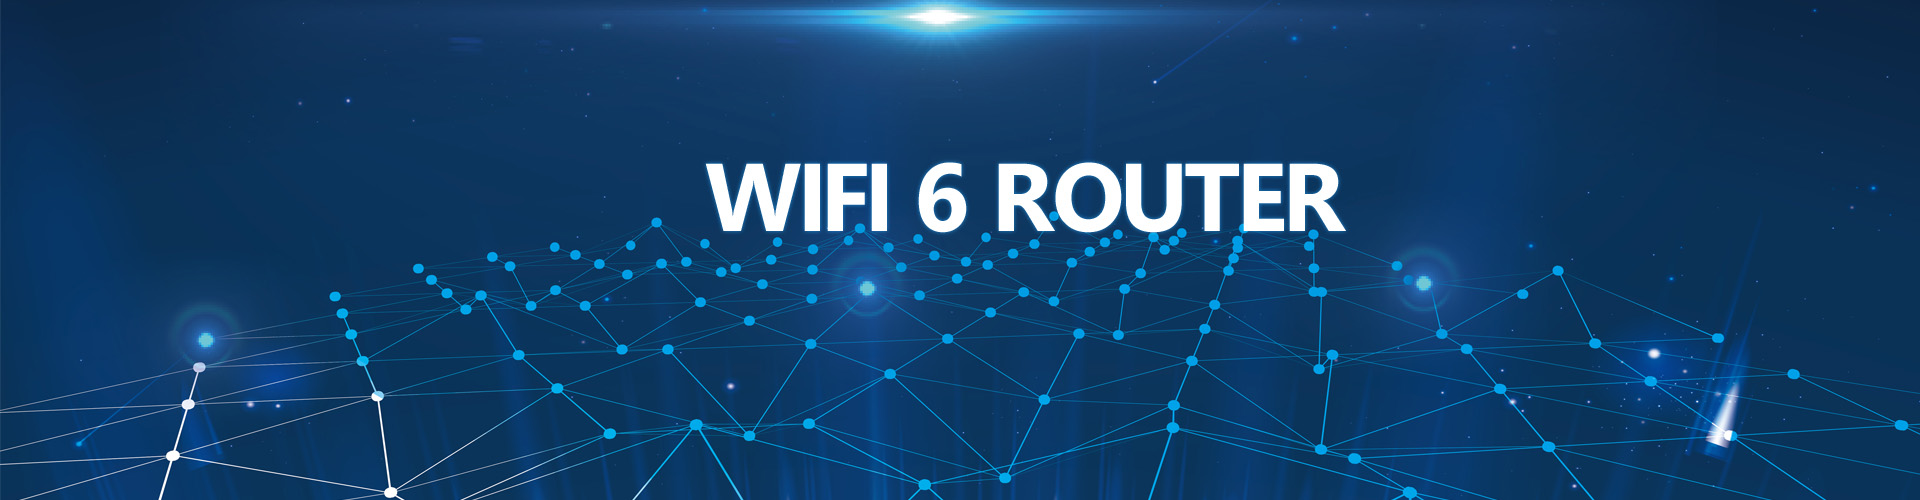 WIFI6 ROUTER